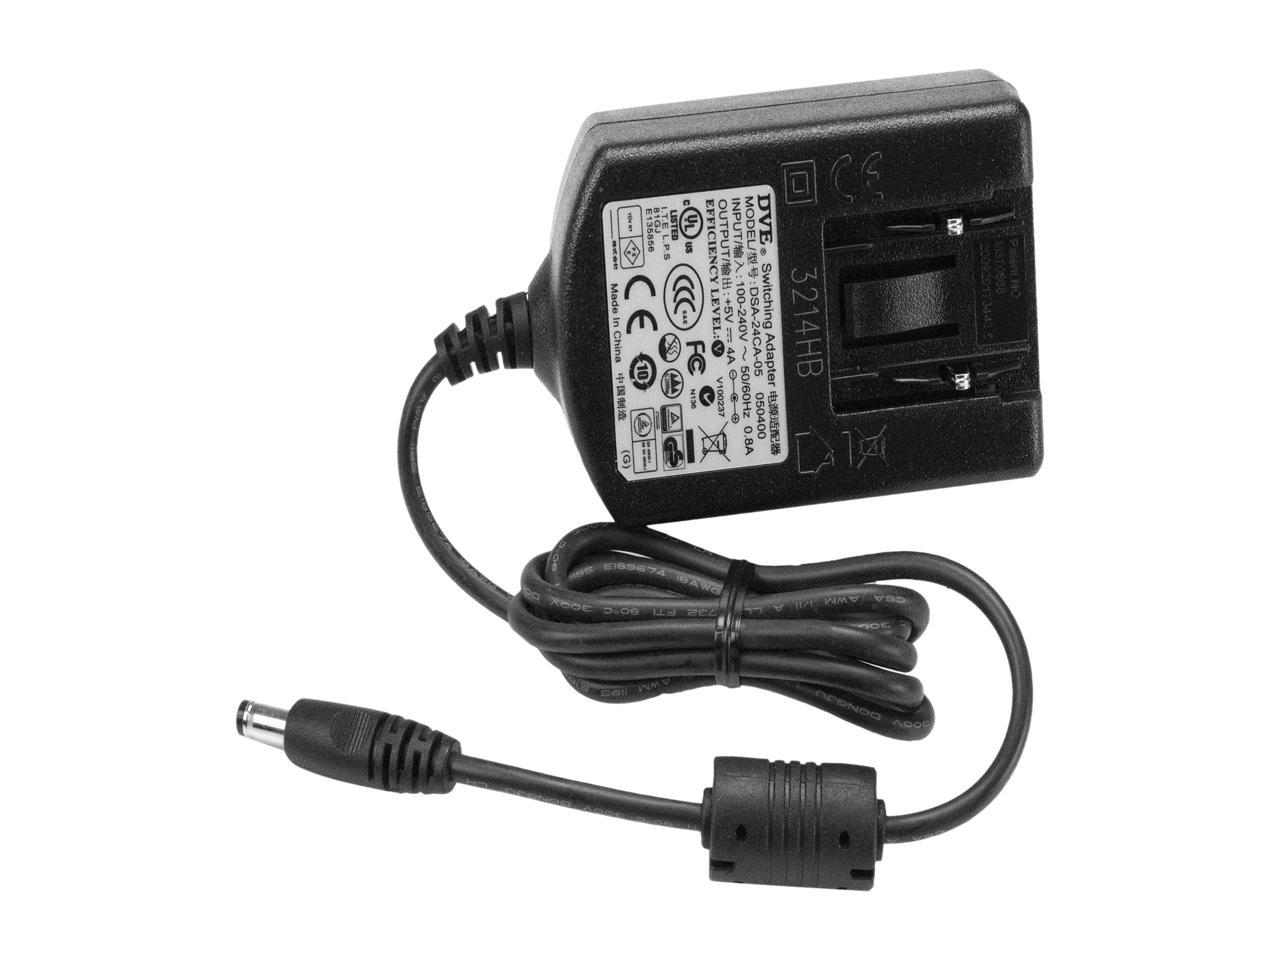 StarTech SVA5M4NEUA Replacement 5V DC Power Adapter - 5 Volts, 4 Amps - image 3 of 4